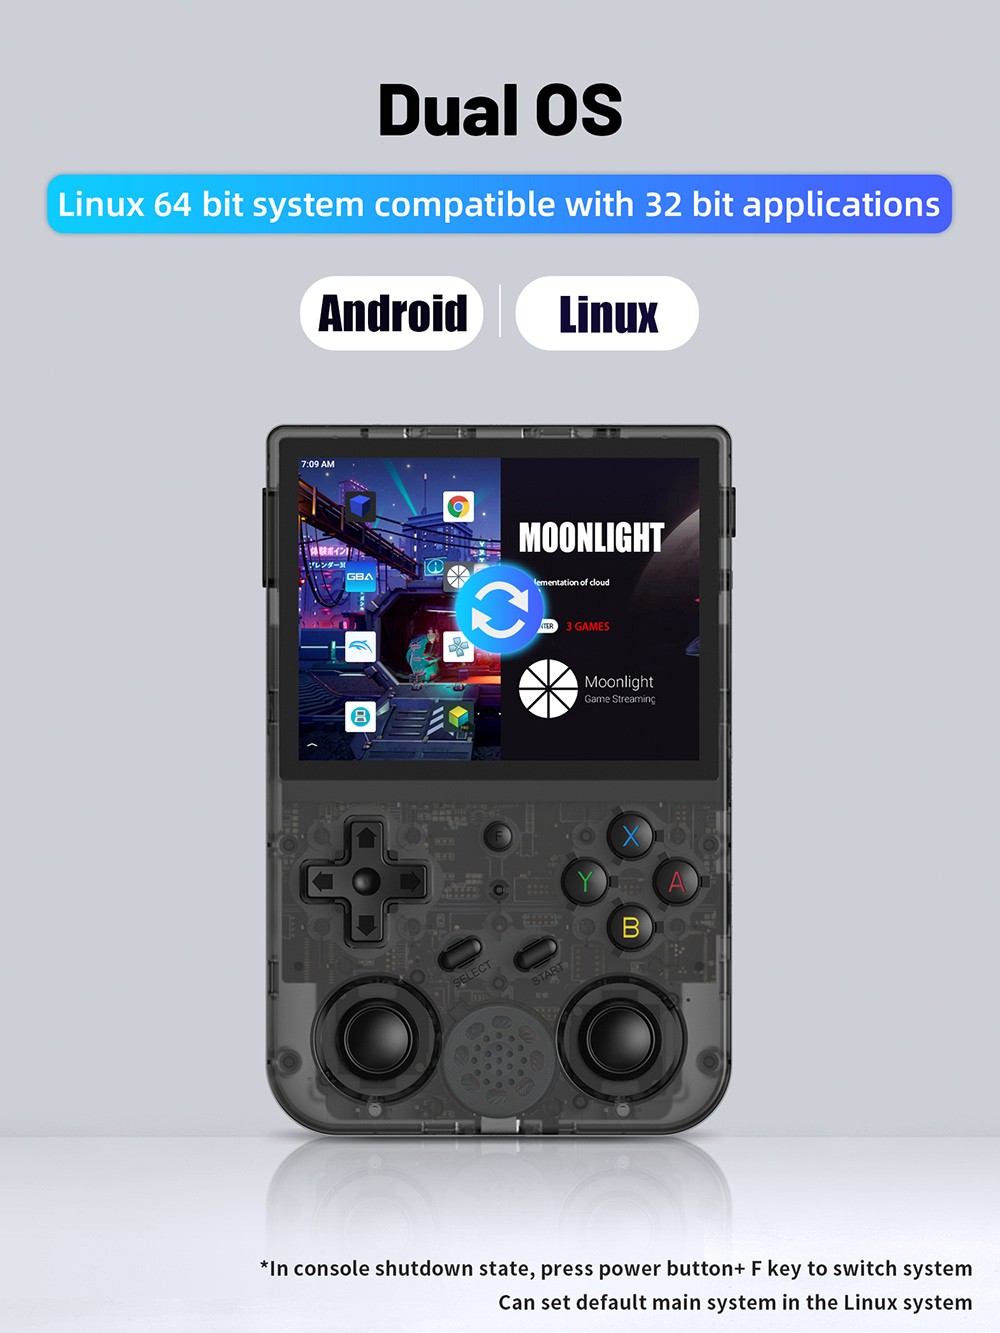 ANBERNIC RG353V Portable Game Console Android 32GB eMMC+16GB Linux TF Card 3.5'' IPS Screen Retro WiFi Bluetooth